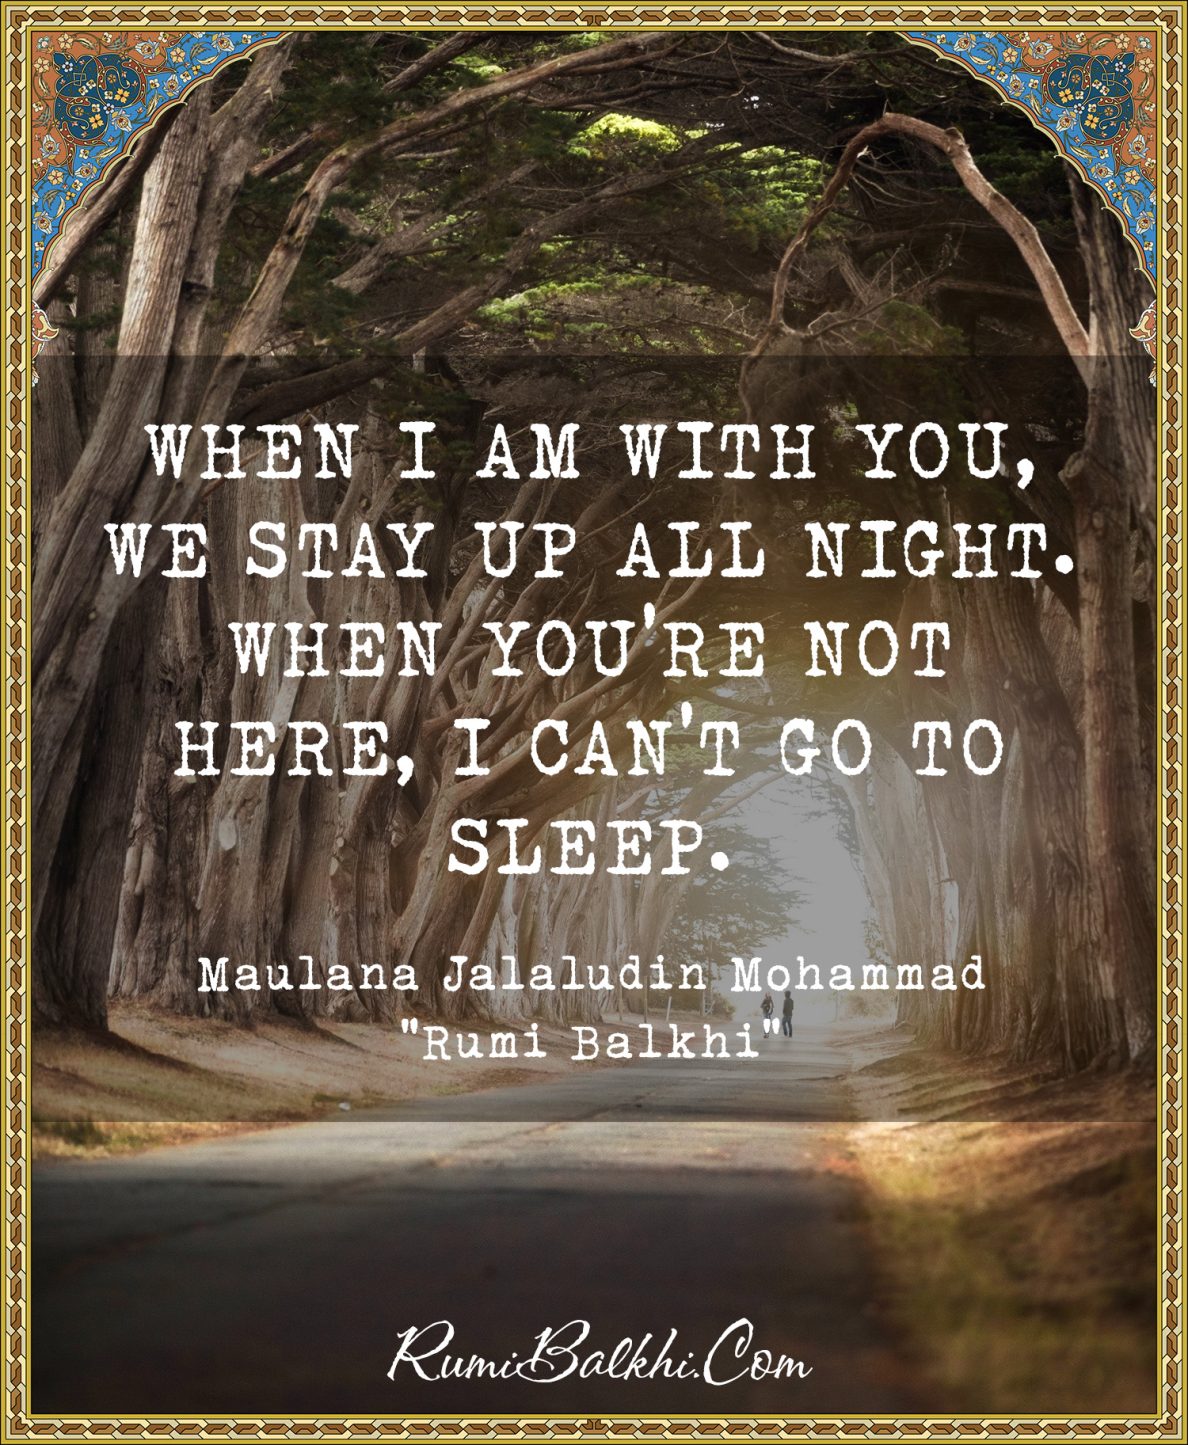 When I am with you, we stay up all night. When you’re not here, I can’t go to sleep